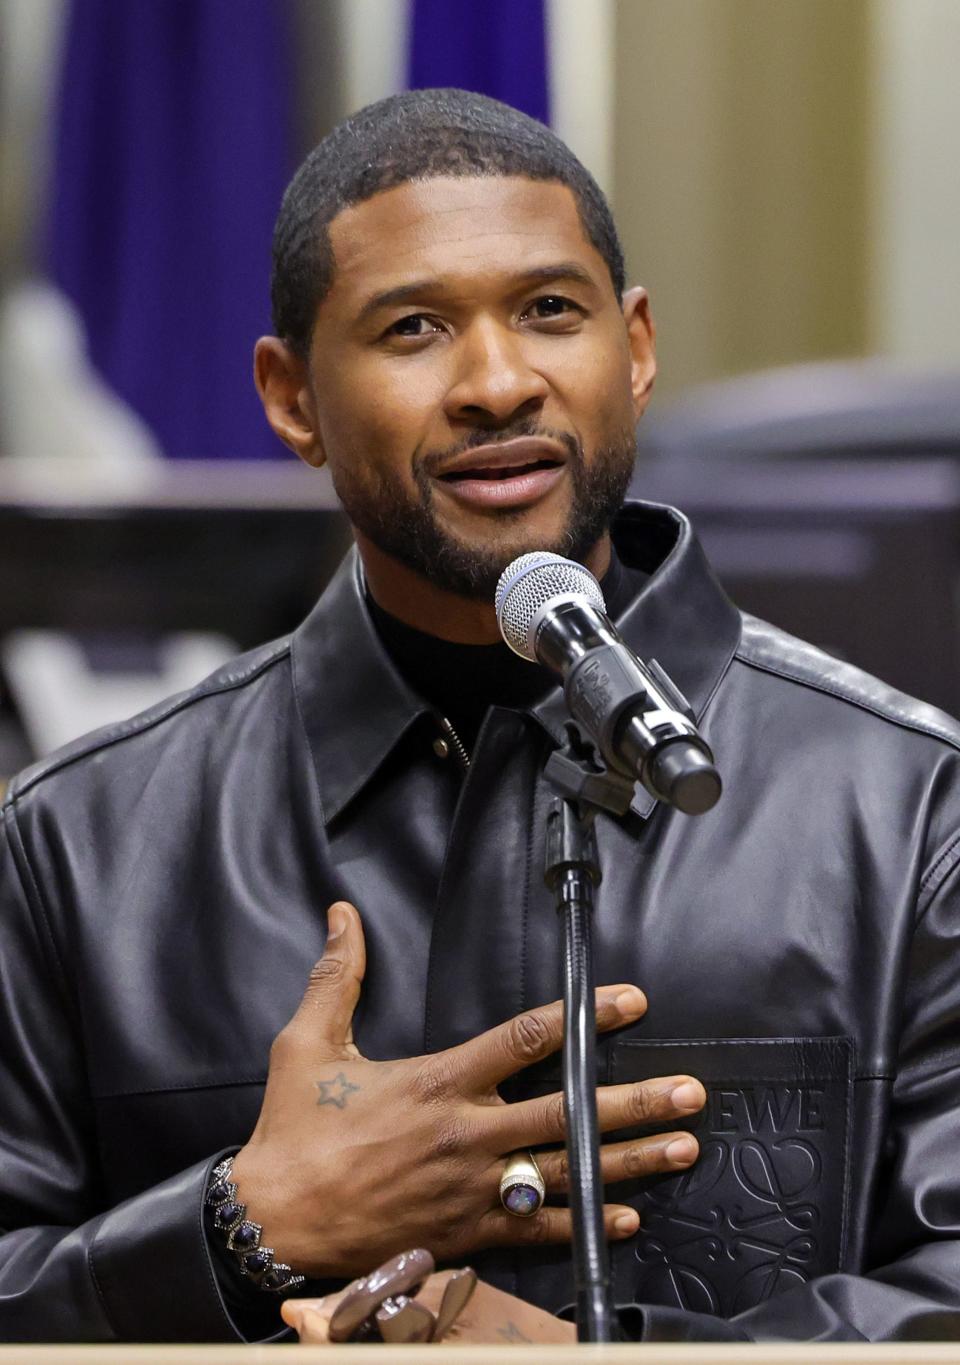 Usher has said the performance will be 